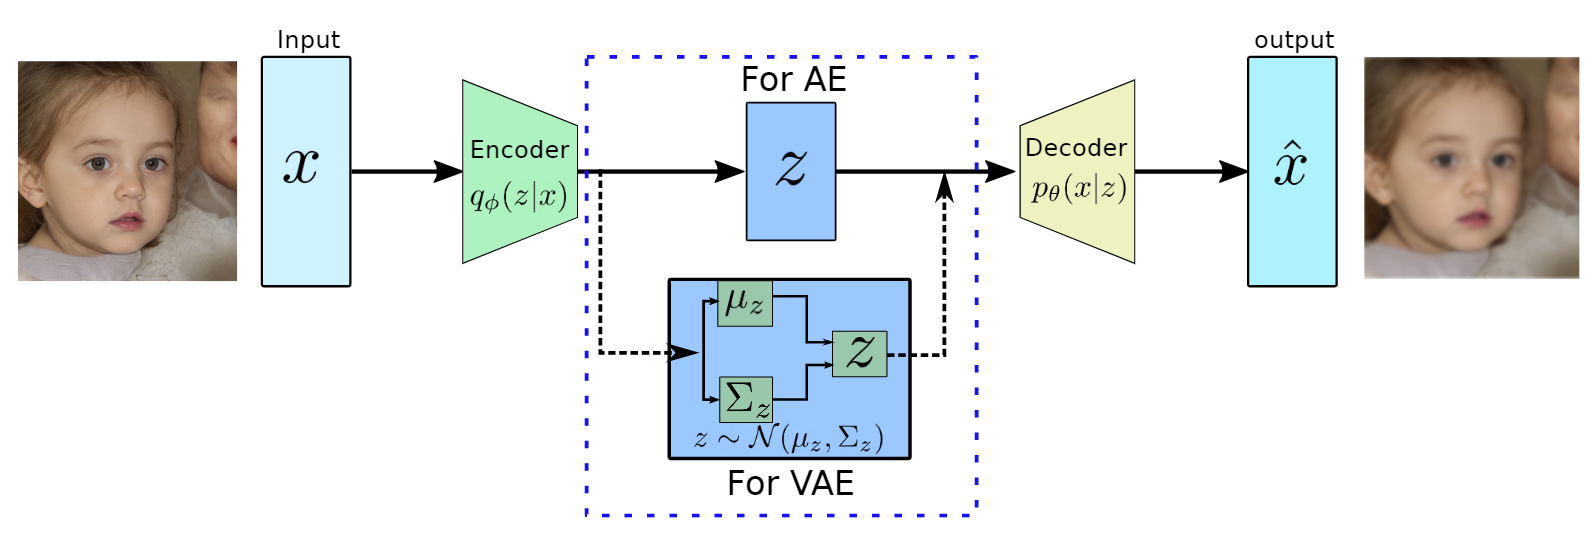 Architectures AE and VAE based on the bottleneck architecture. The decoder part work as a generative model during inference.